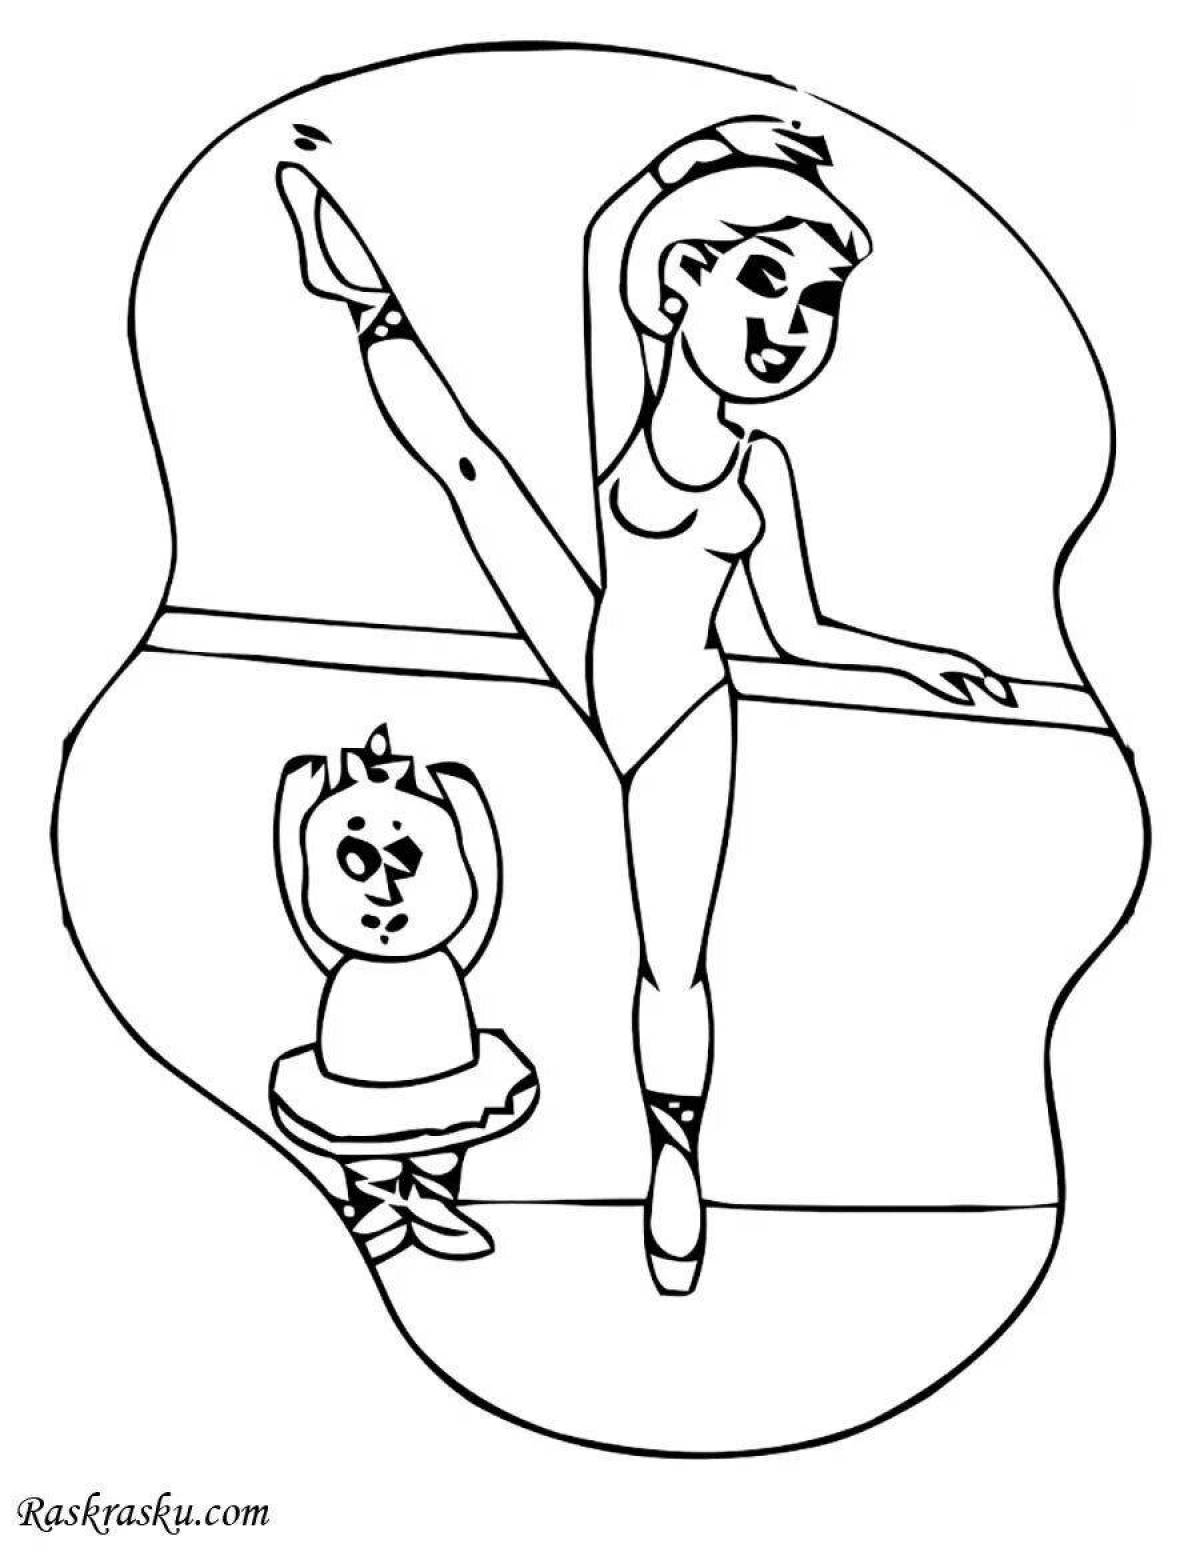 Exquisite gymnastics coloring for girls